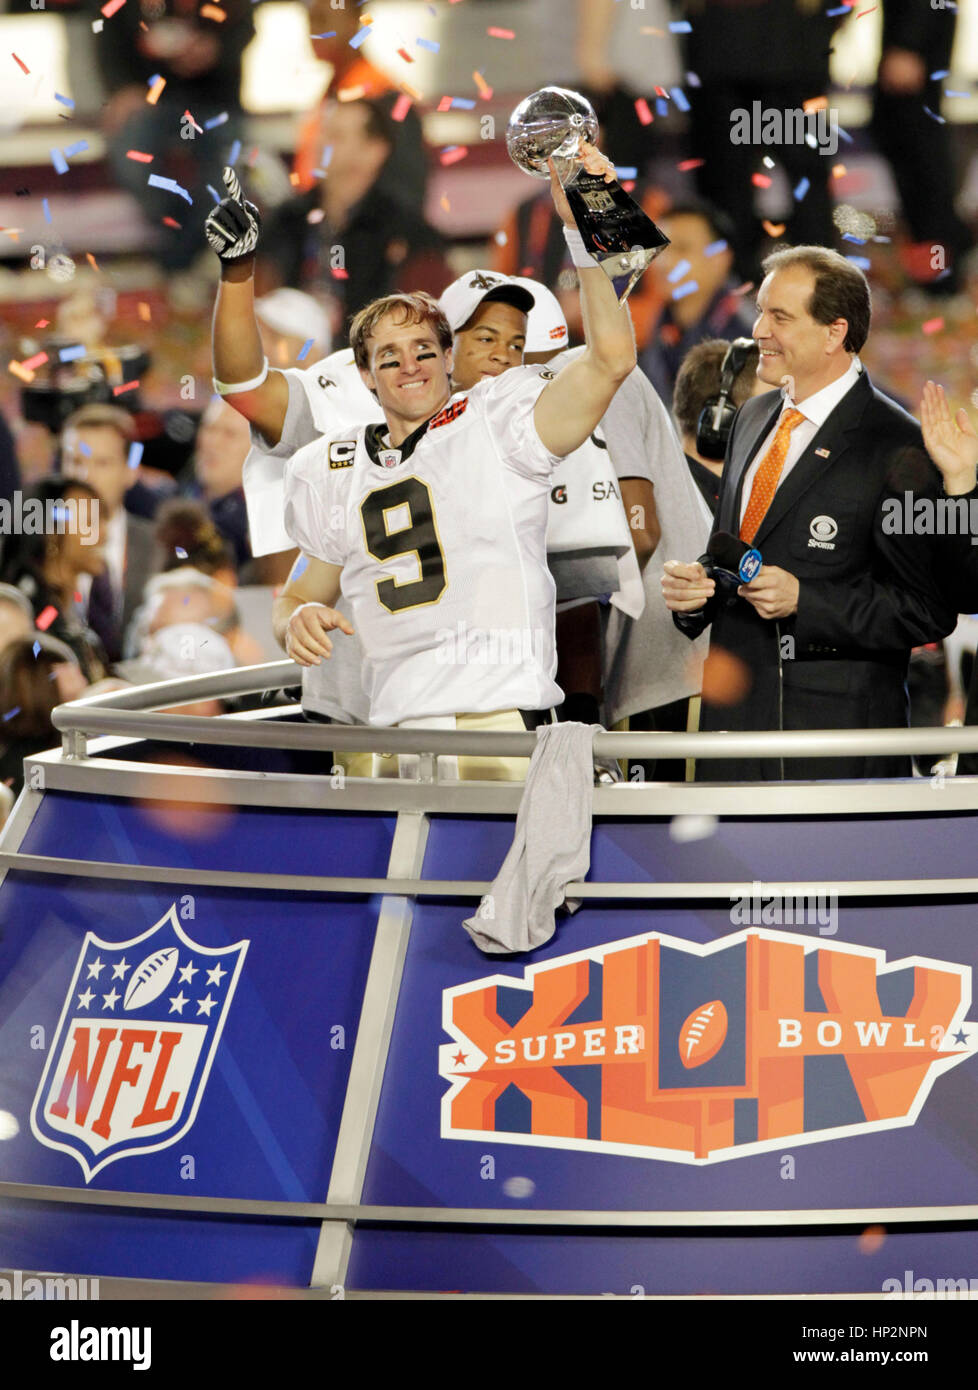 New Orleans Saints quarterback Dree Brees holds the Vince Lombardi Trophy at the Super Bowl in Miami, Florida on February 7, 2010. Photo by Francis Specker Stock Photo